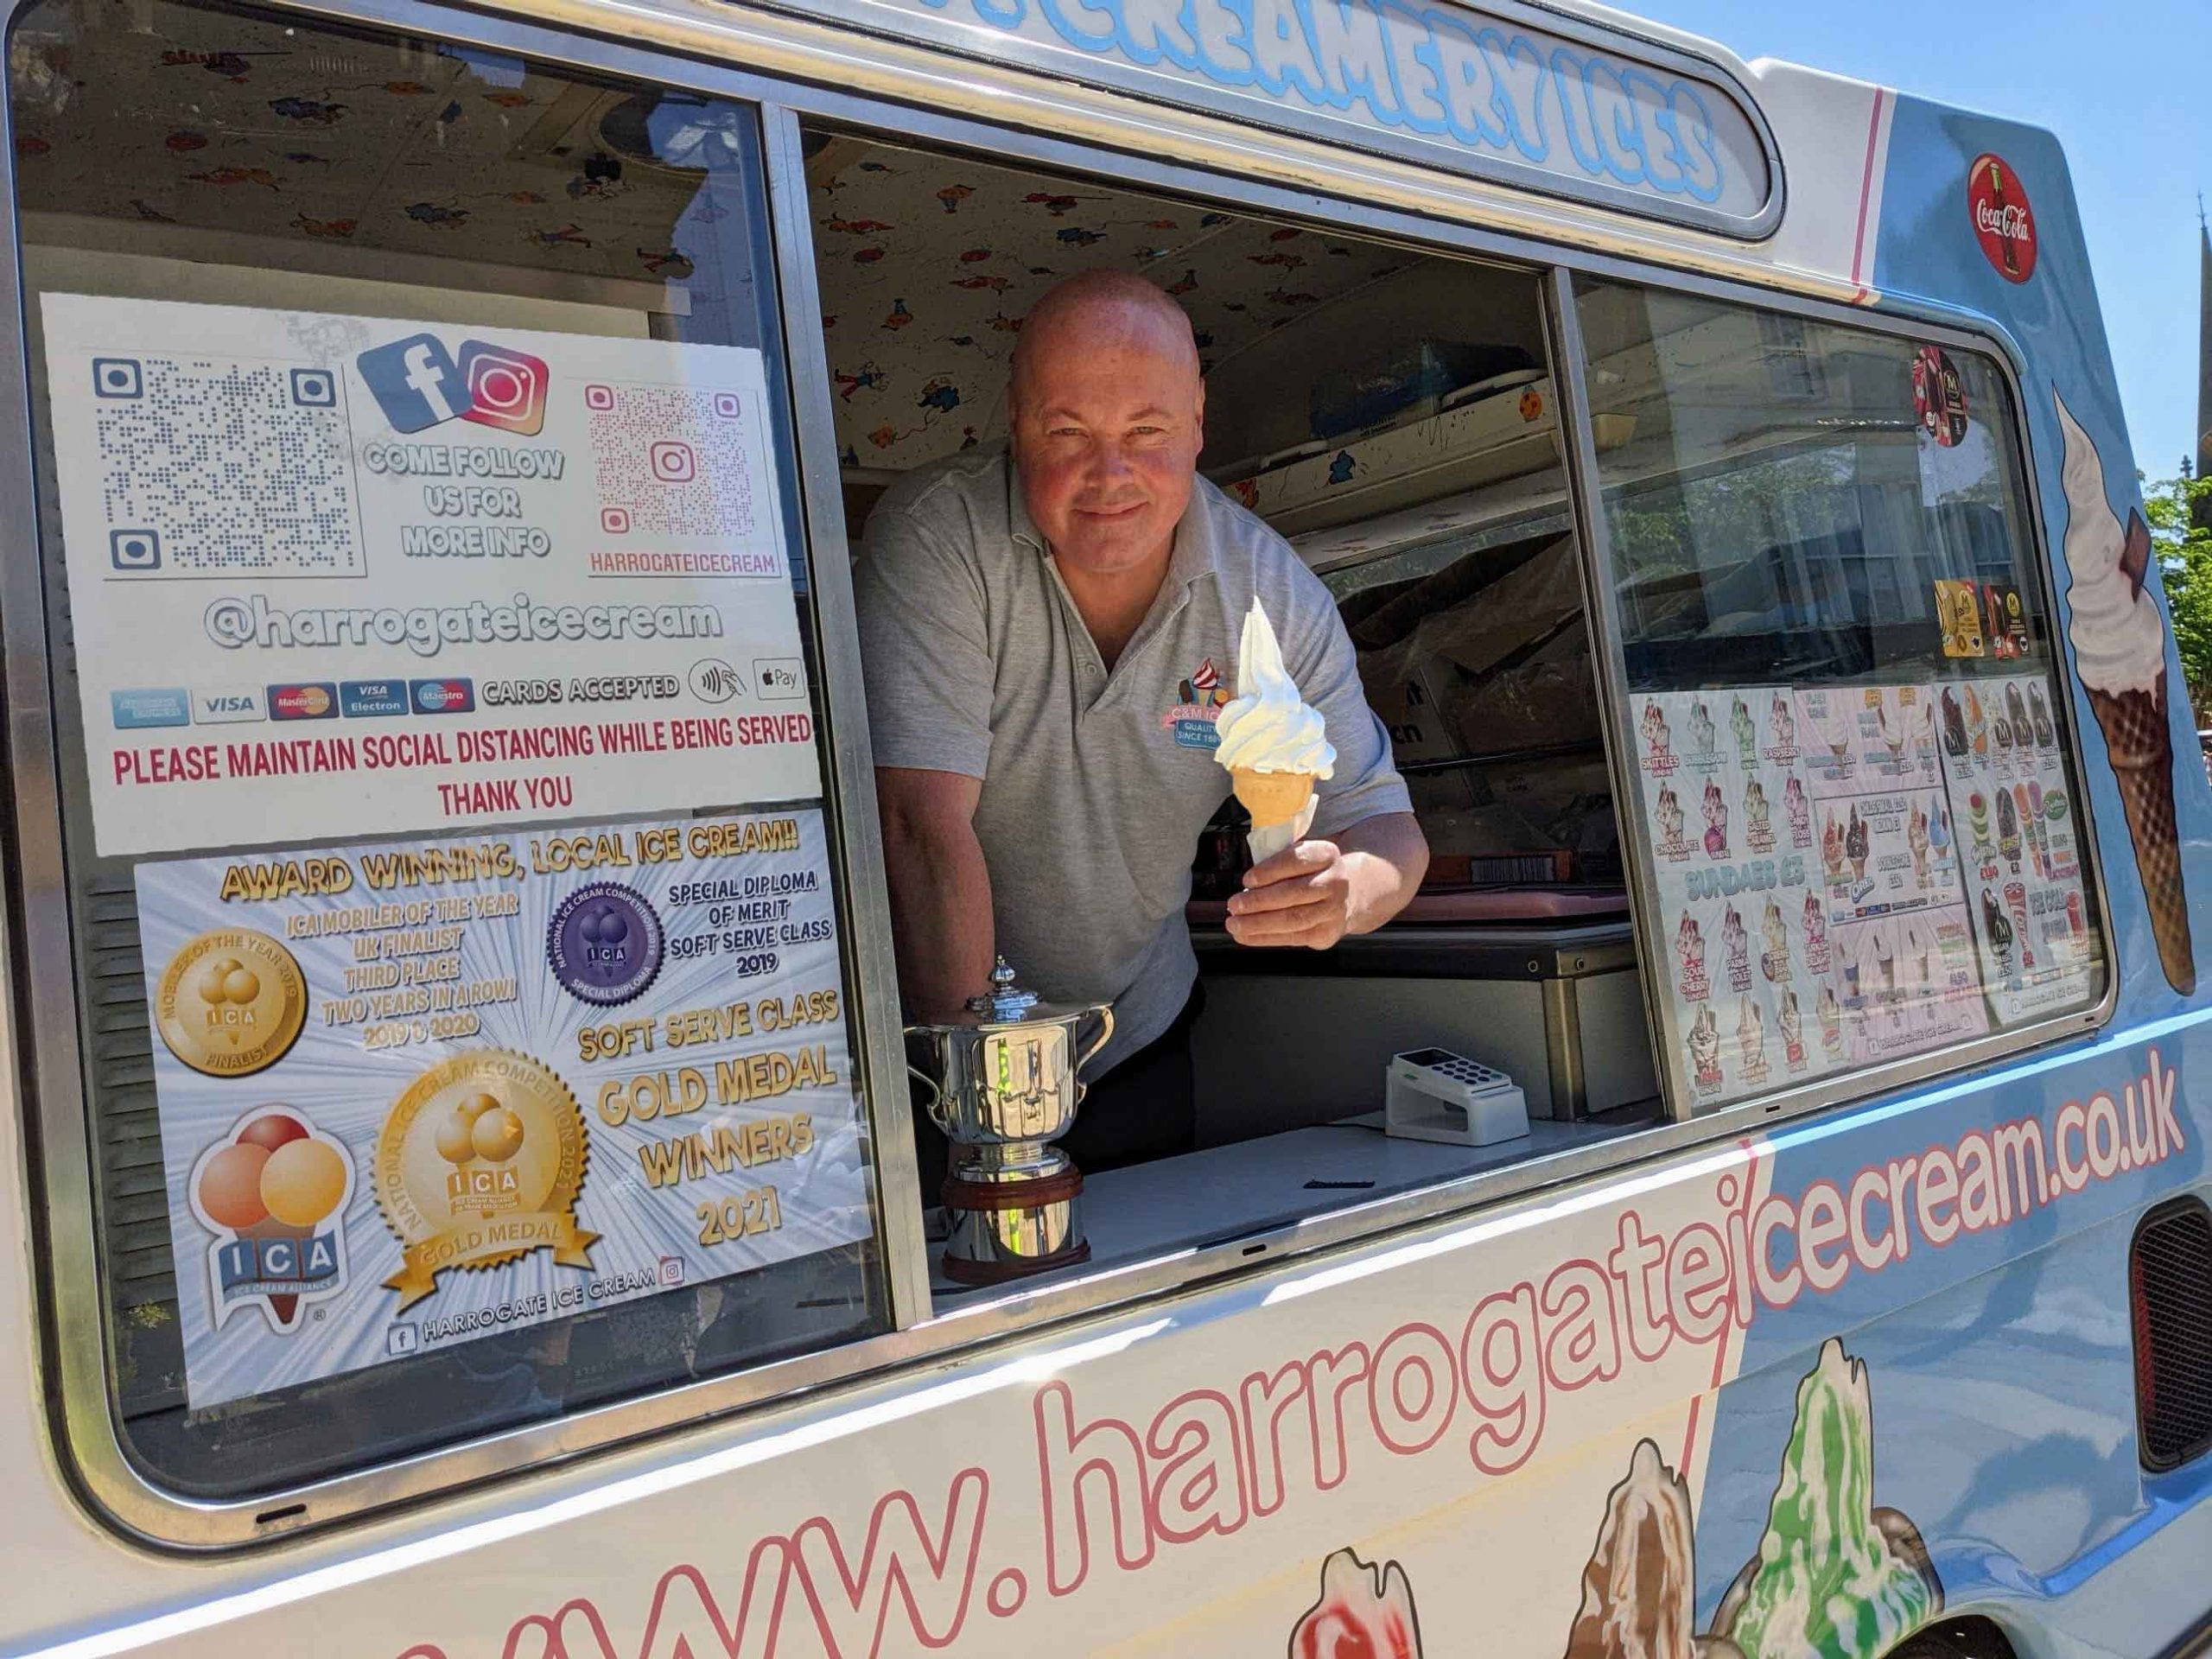 John Taylor from ice cream van business C and M Ices in Harrogate